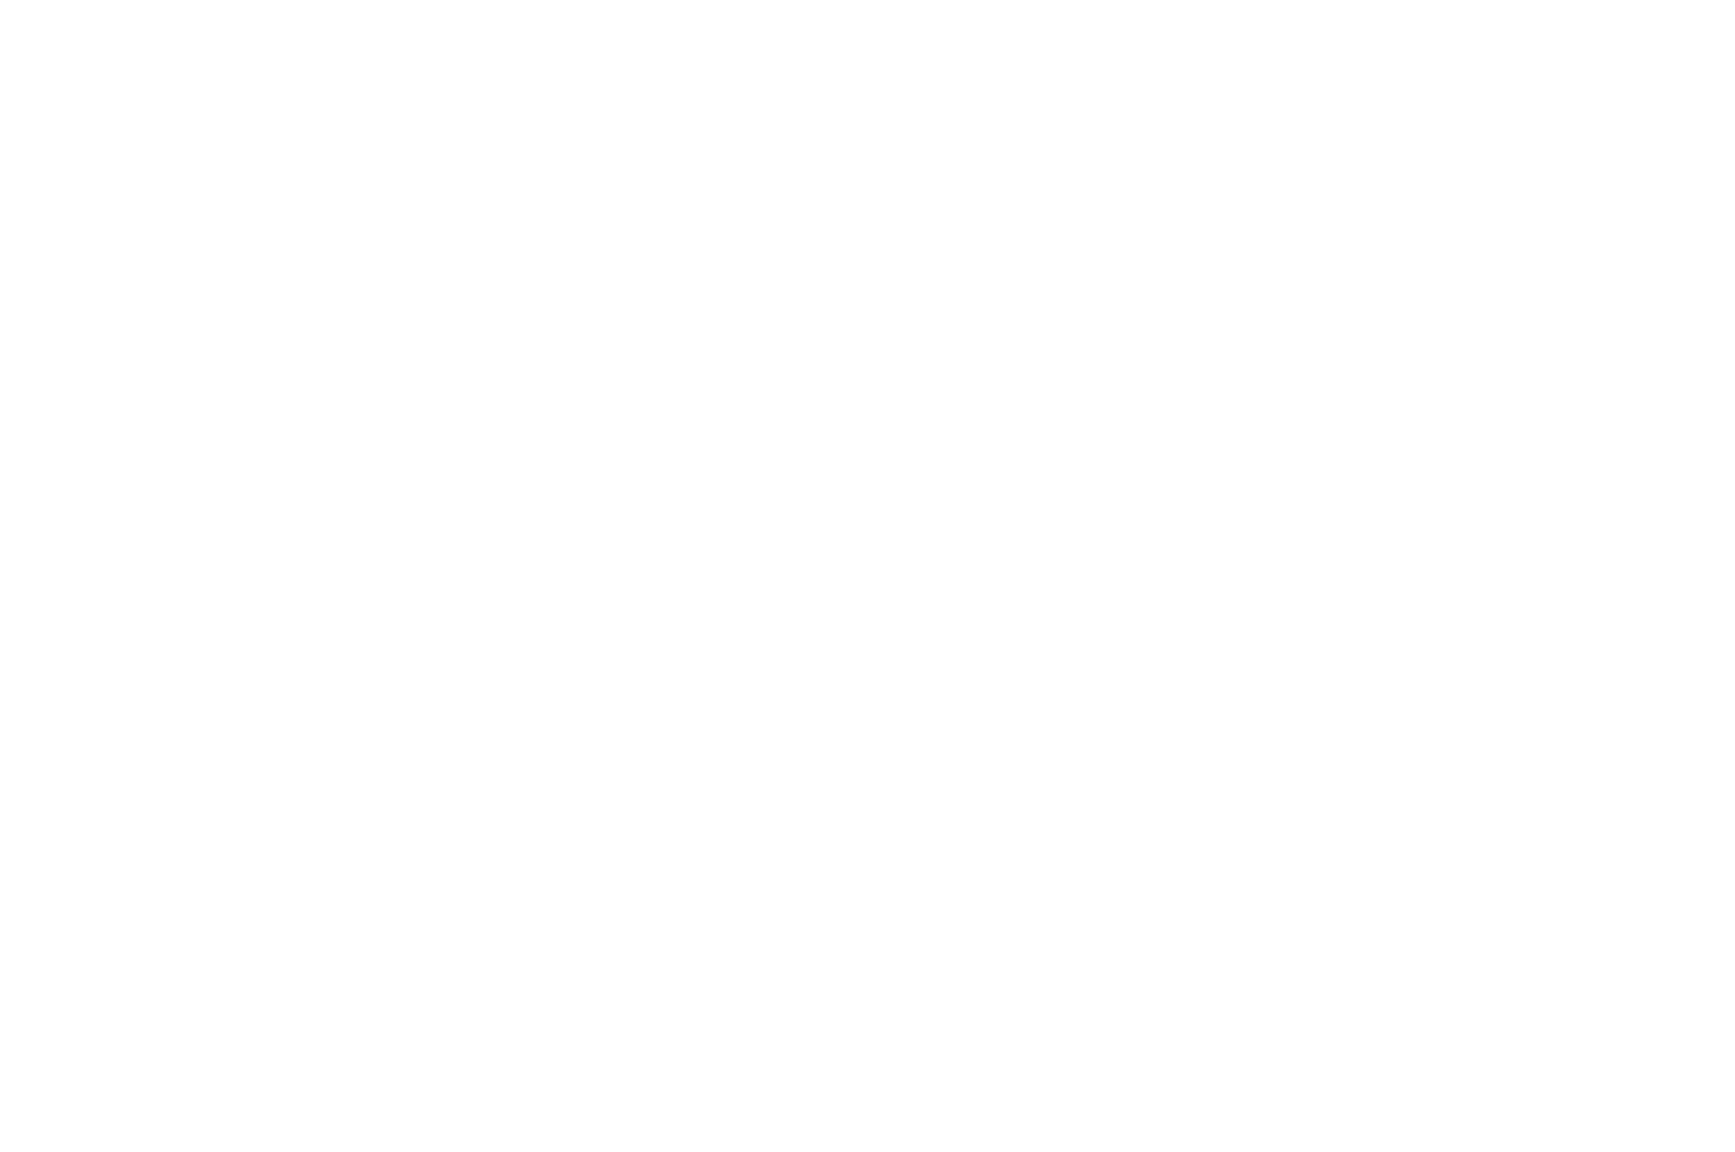 WOMEN FILMAKERS MUSIC VIDEO - Accolade Global Film Competition - 2022